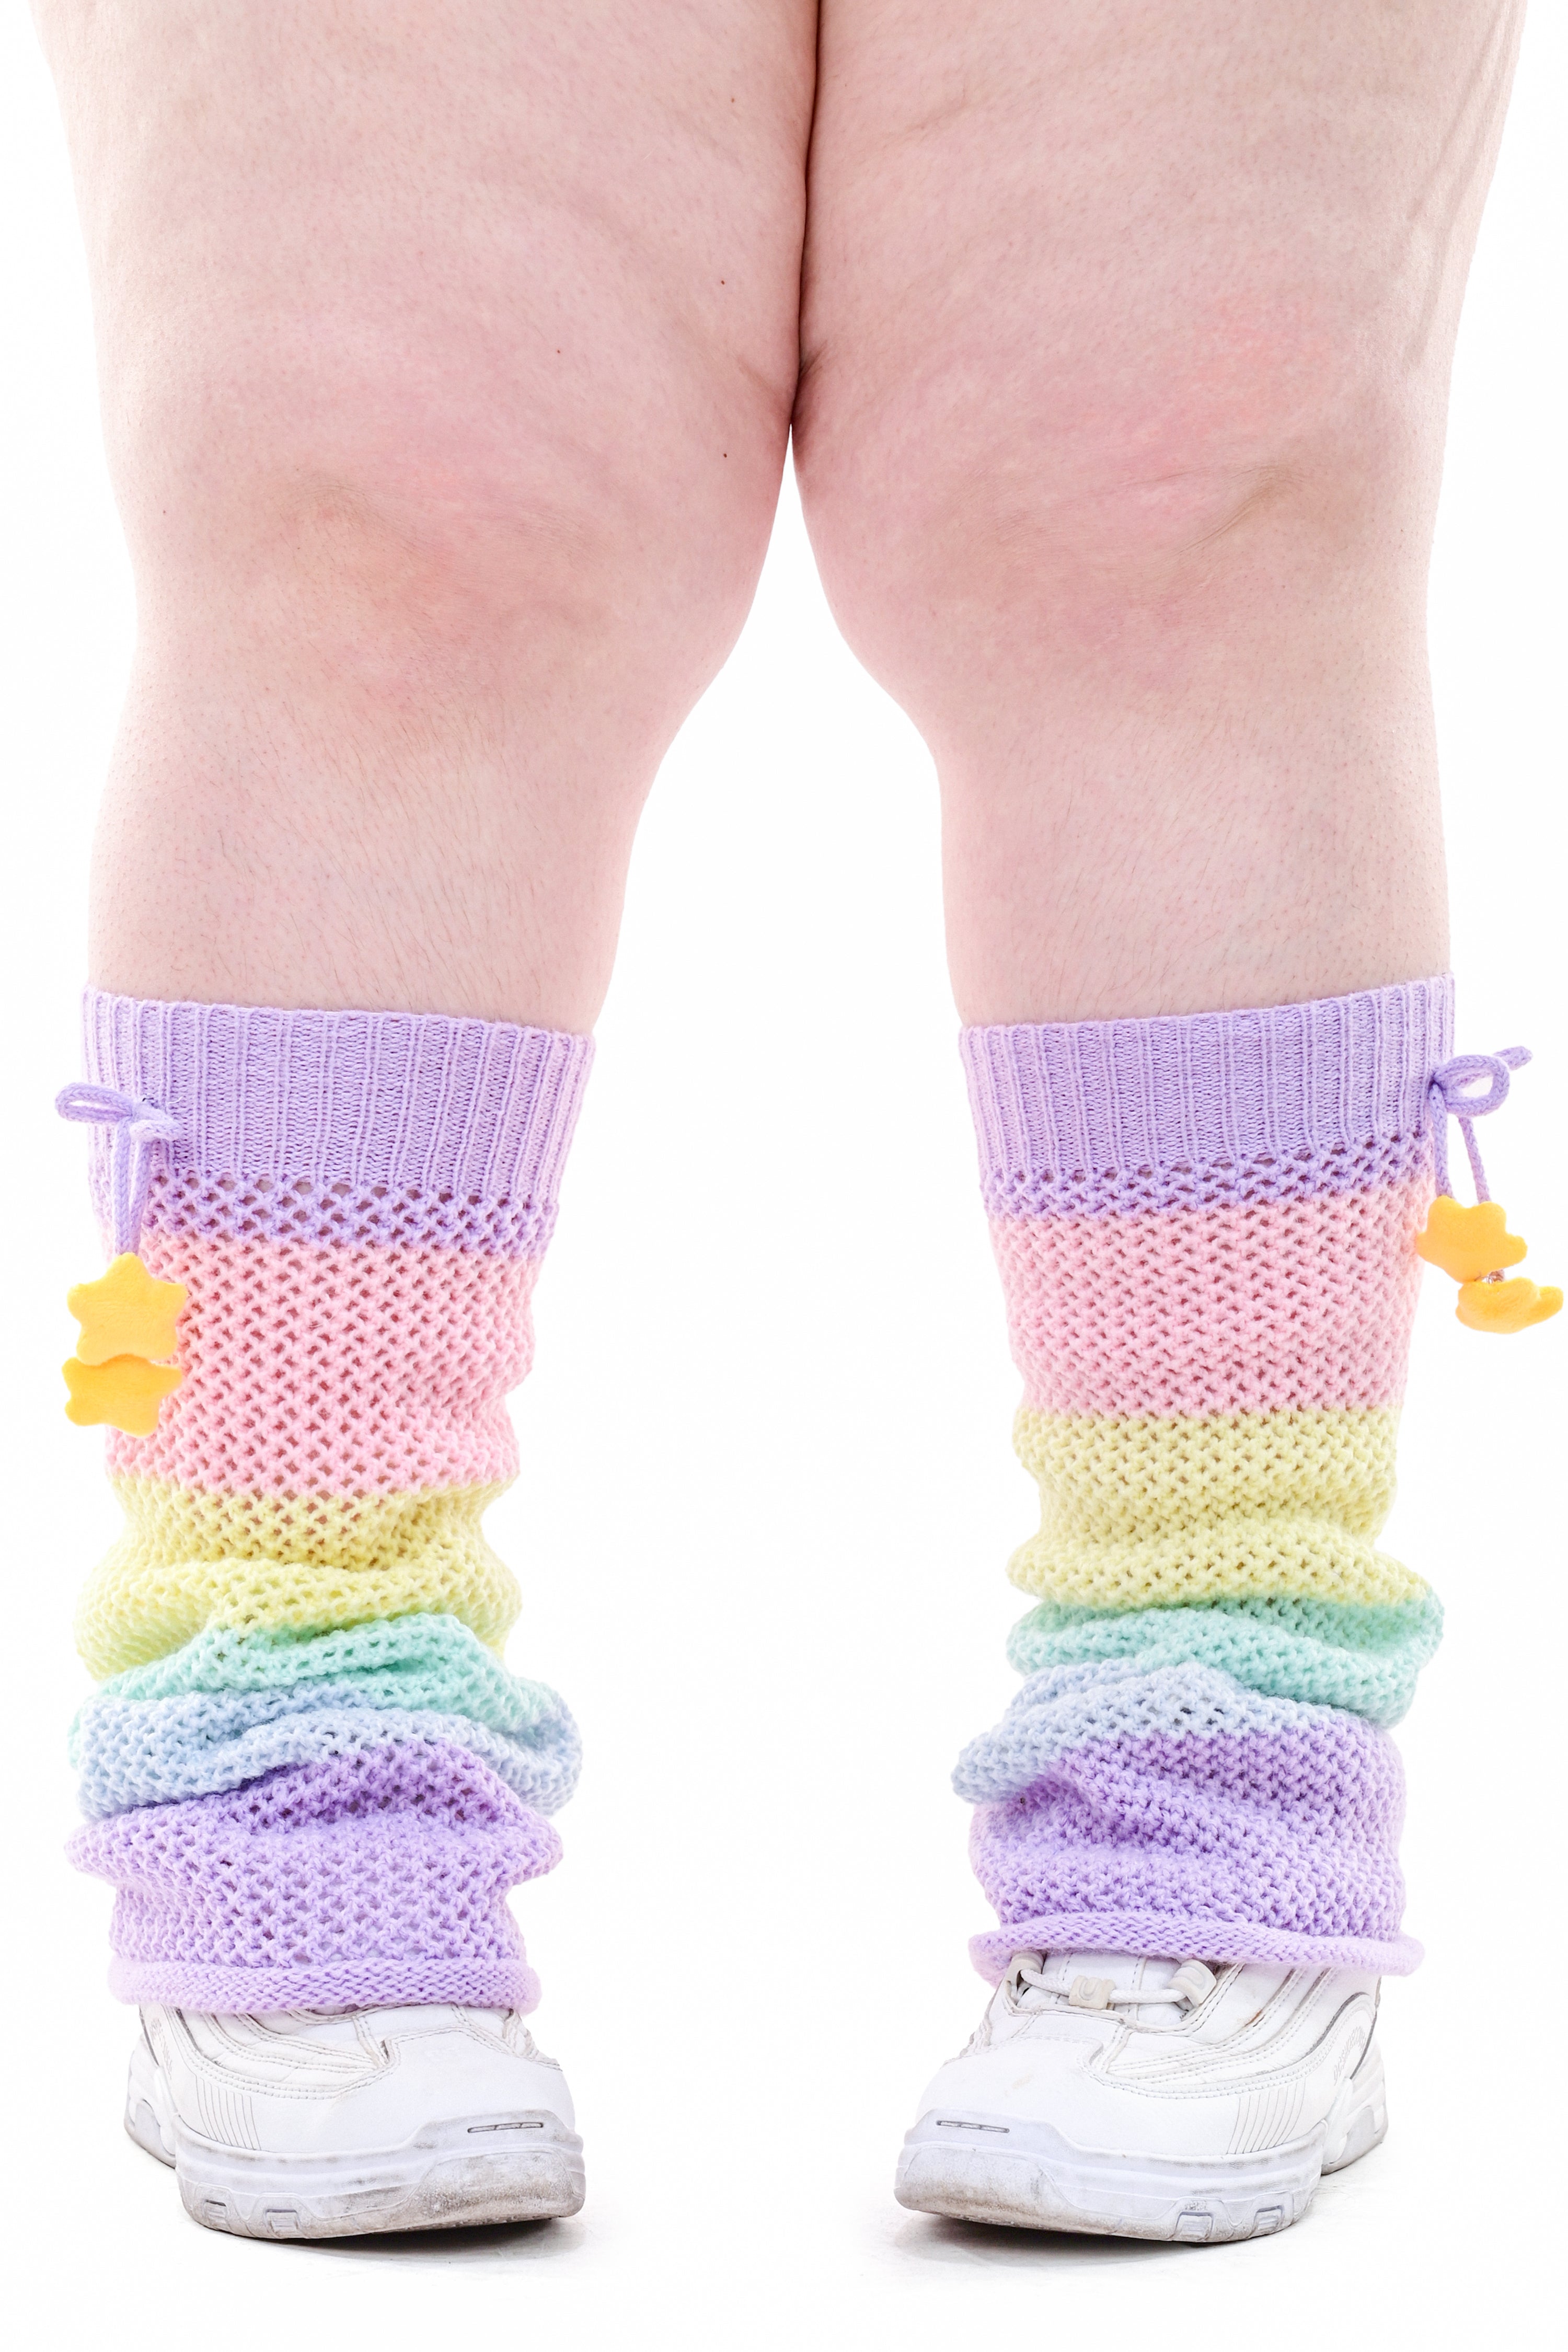 Rainbow Stripe Leg Warmers - Sign up for Restock Notifications!